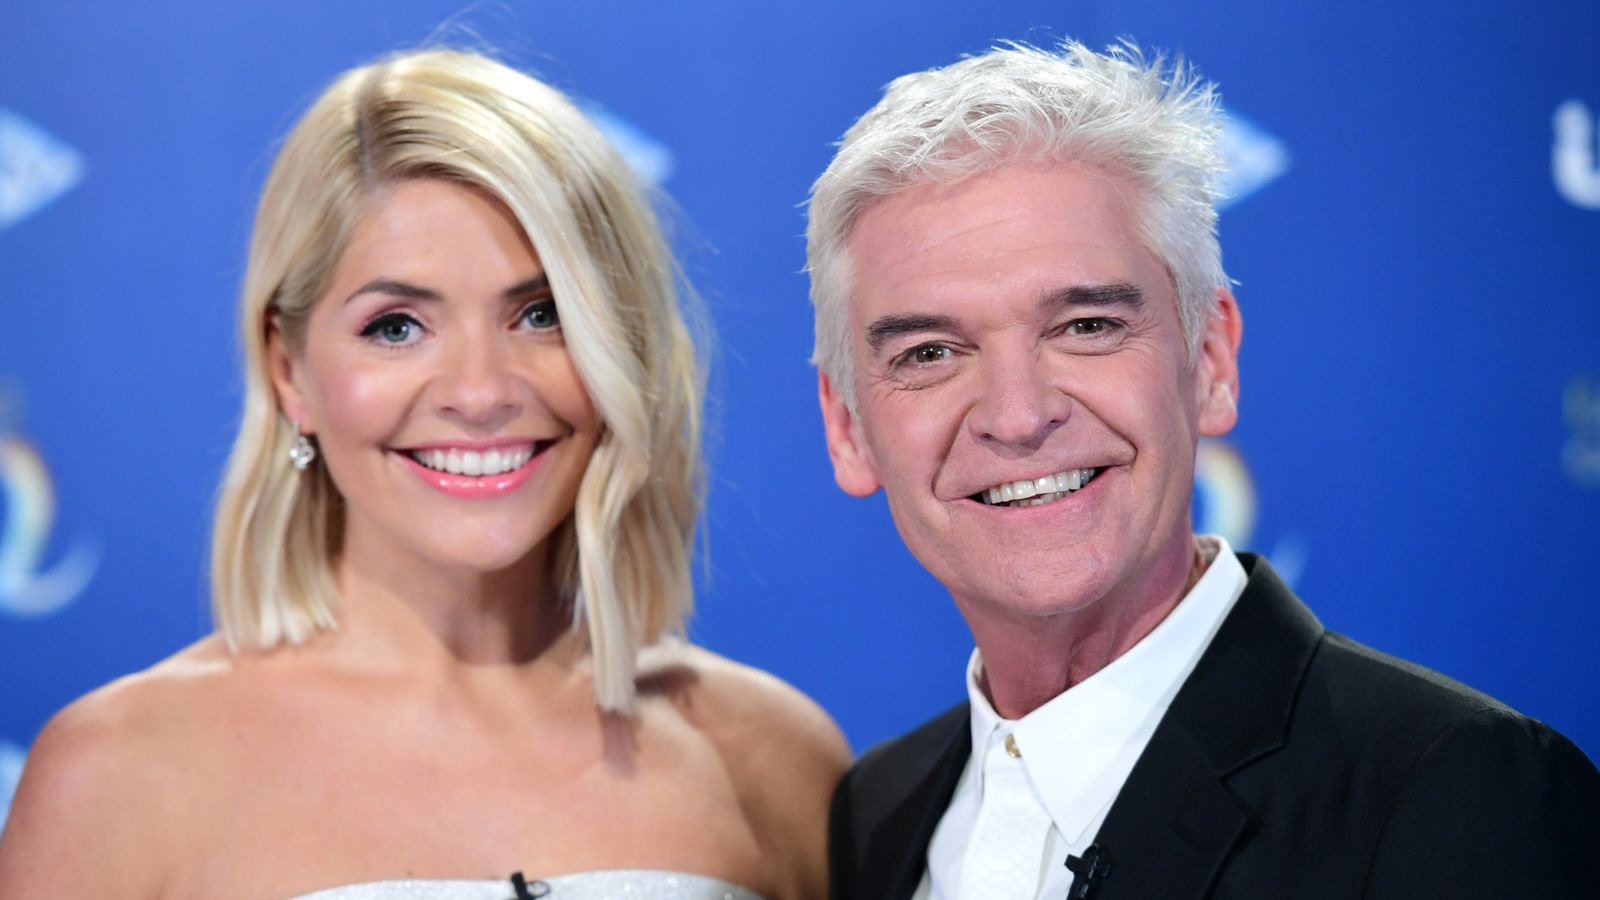 Holly Willoughby says Phillip Schofield 'directly' lied to her over affair with younger colleague